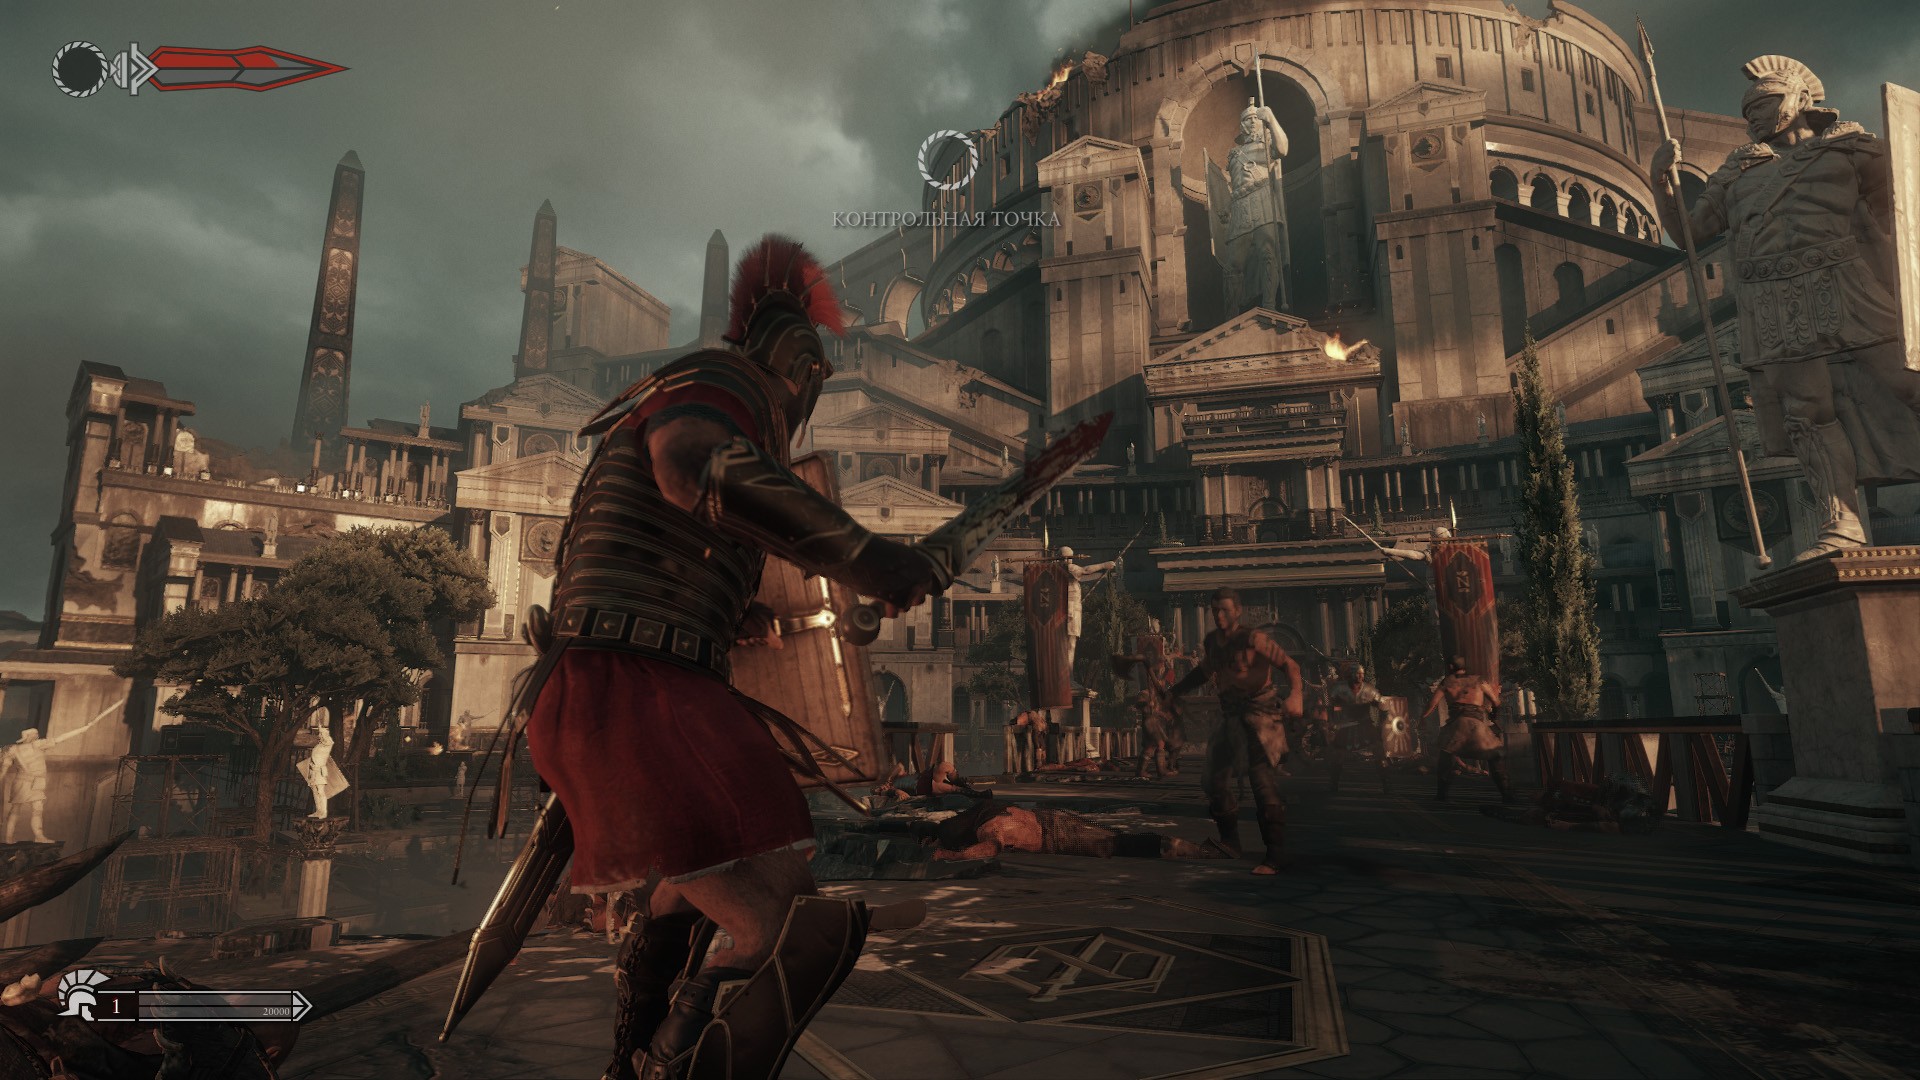 We arrived reached rome early in the. Игра son of Rome. Игра Ryse son of Rome. Ryse son of Rome 2. Ryse: son of Rome (2013).